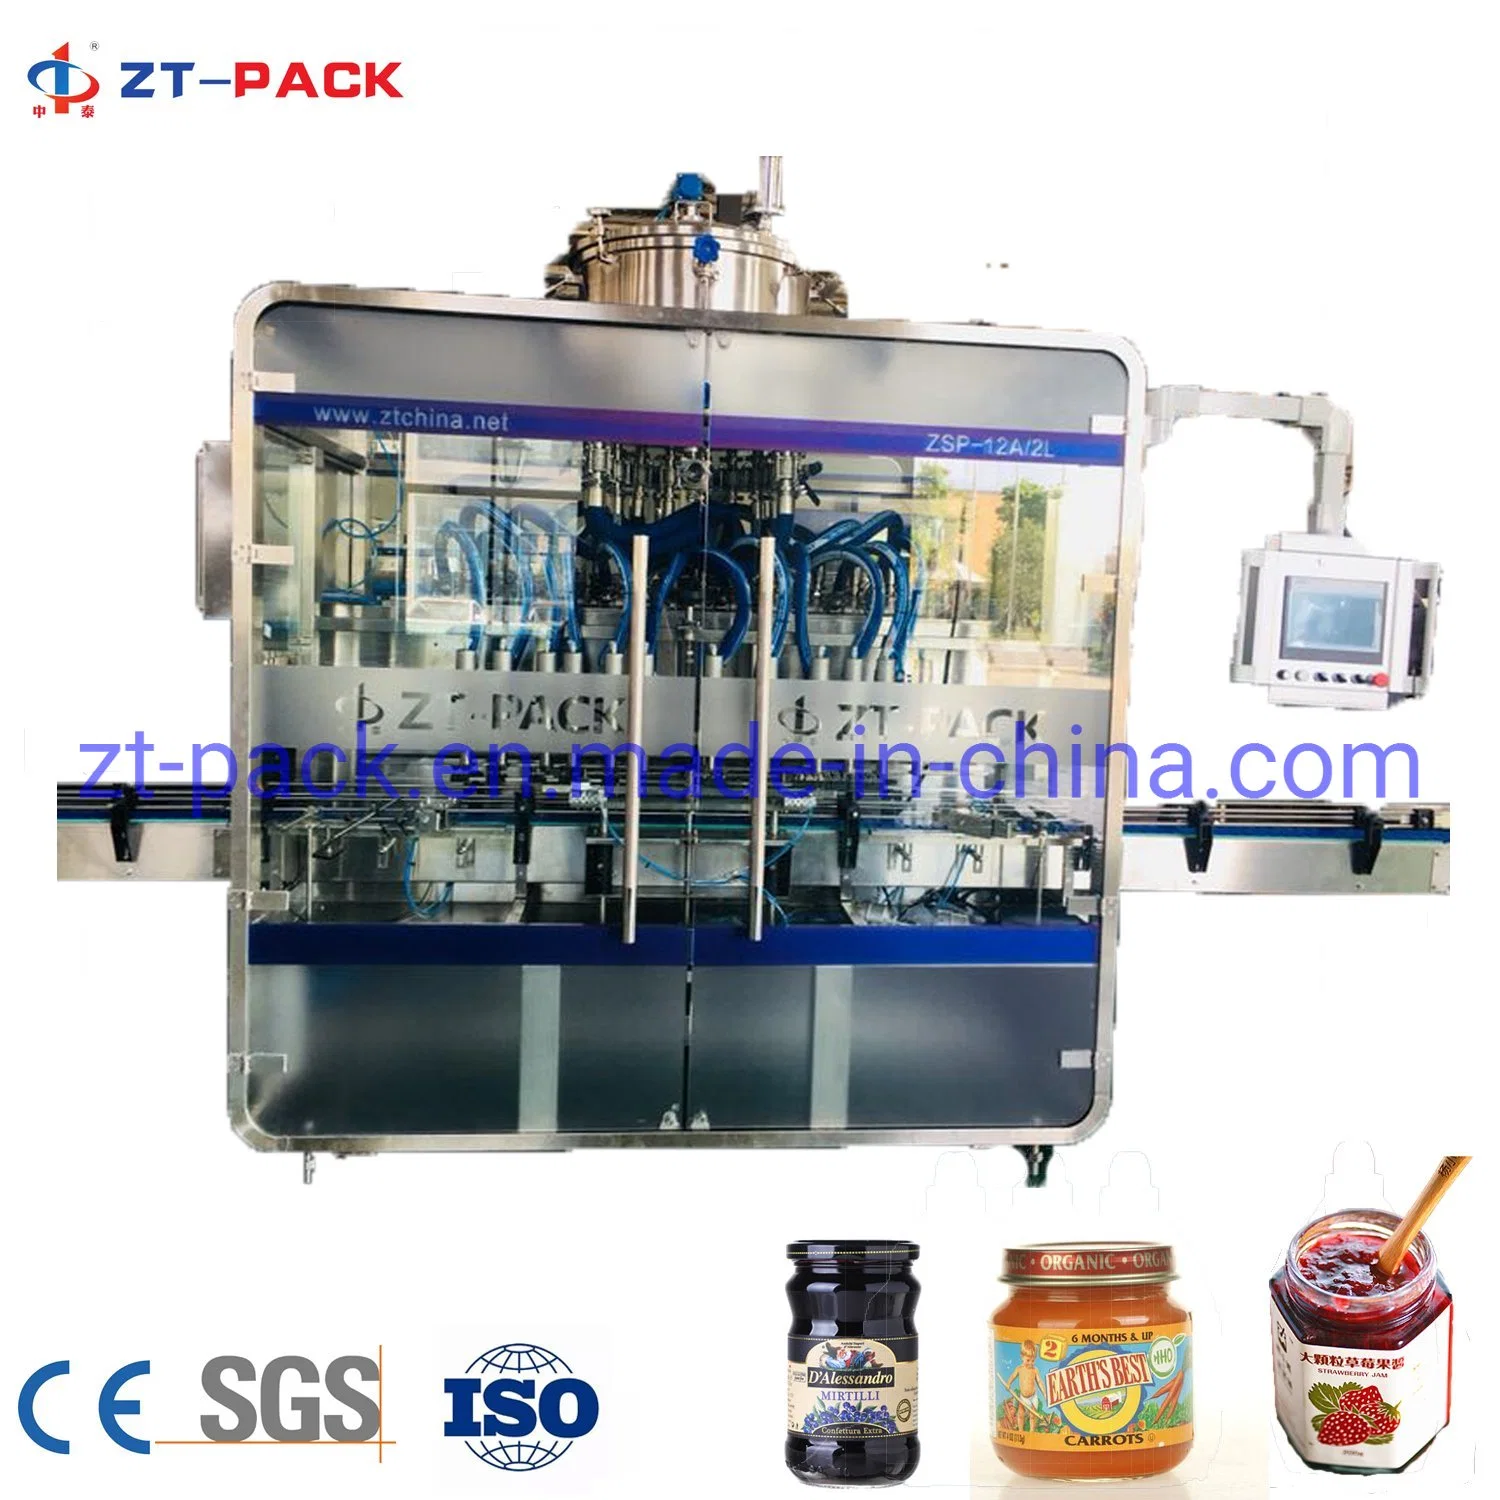 Automatic Sauce Jam Ketchup Tomato Sauce Soy Sauce Filling Machine for Tomato Paste Ketchup Jam Sauce Fruits Sauce Filling Line Oil High Viscosity Piston Filler